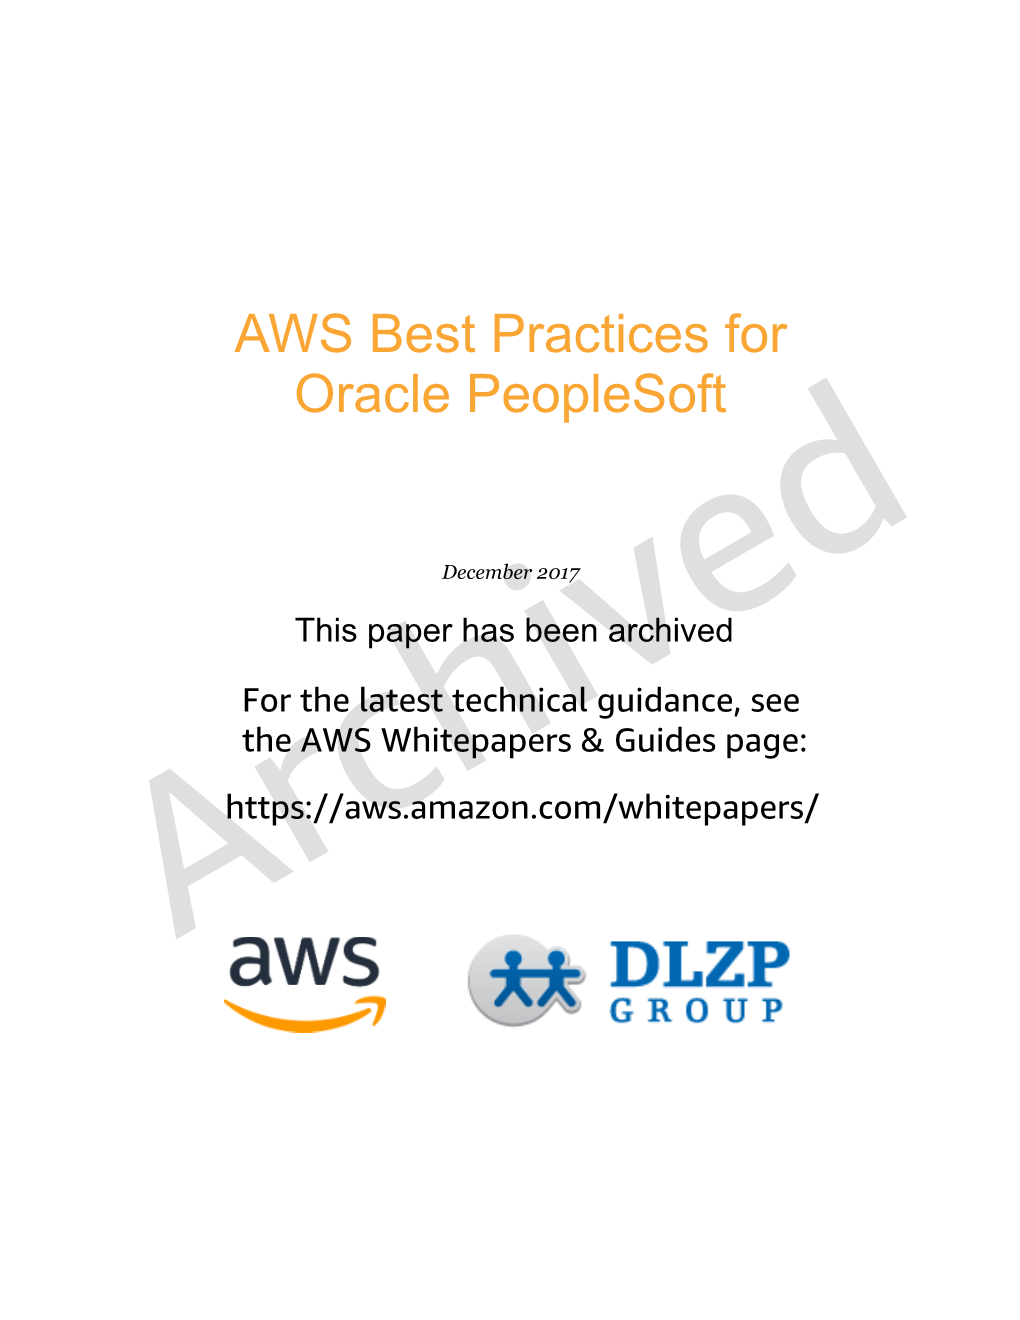 AWS Best Practices for Oracle Peoplesoft